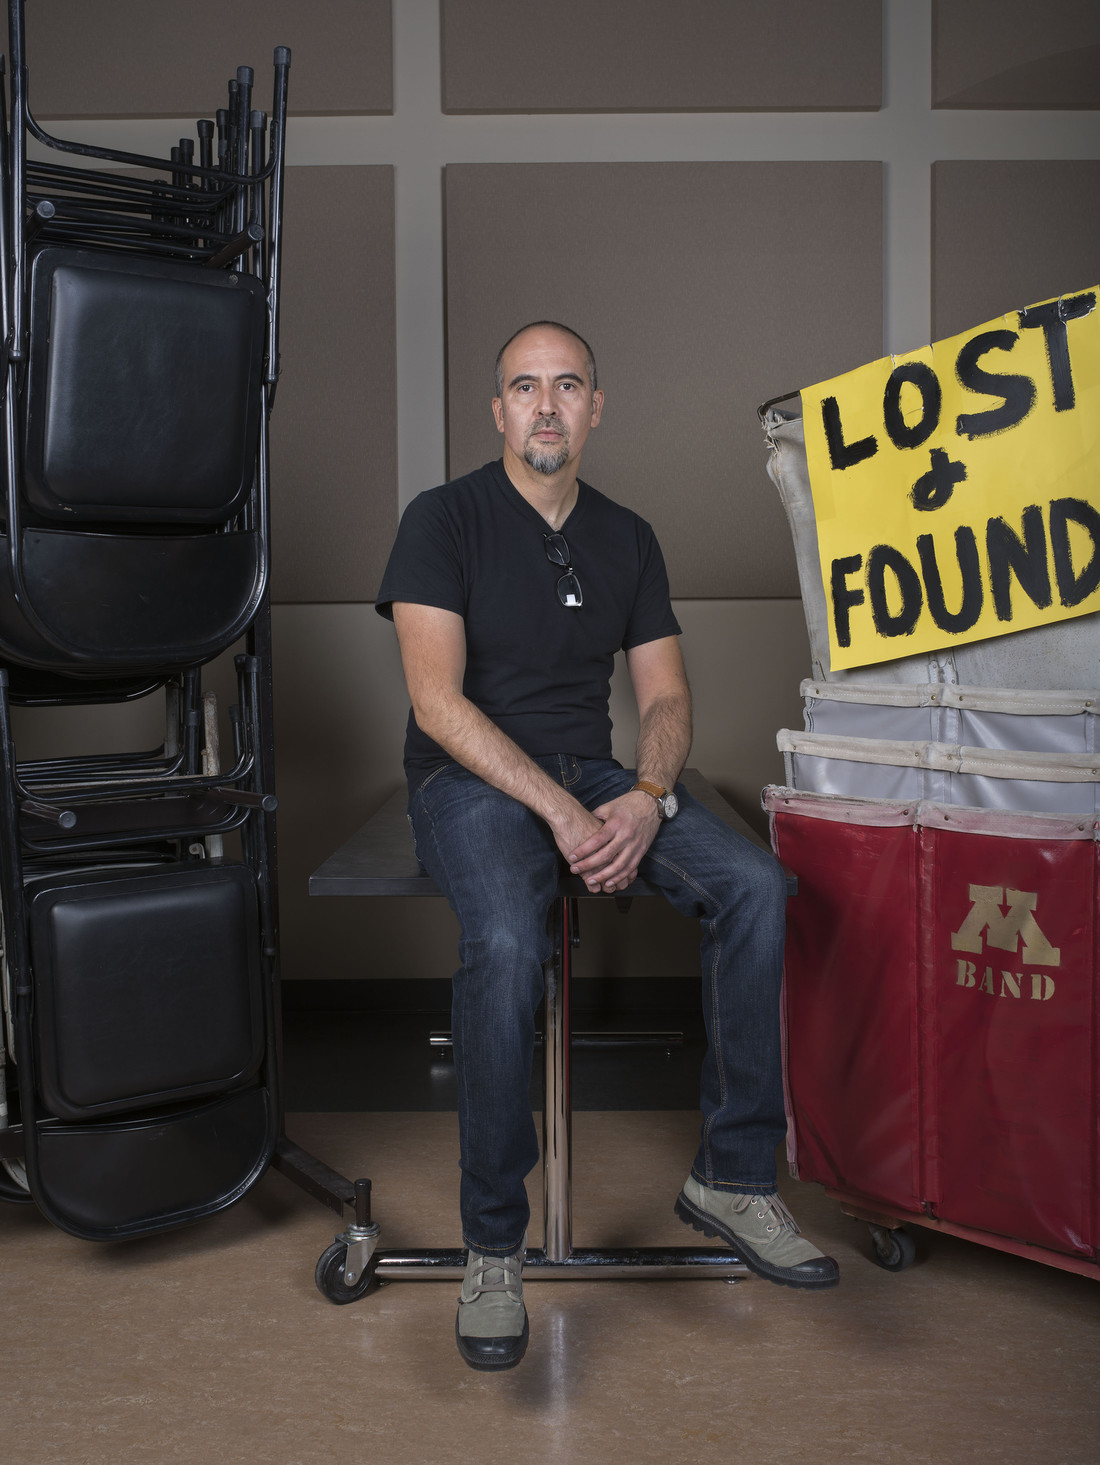 Man sitting on table next to bins with lost and found sign